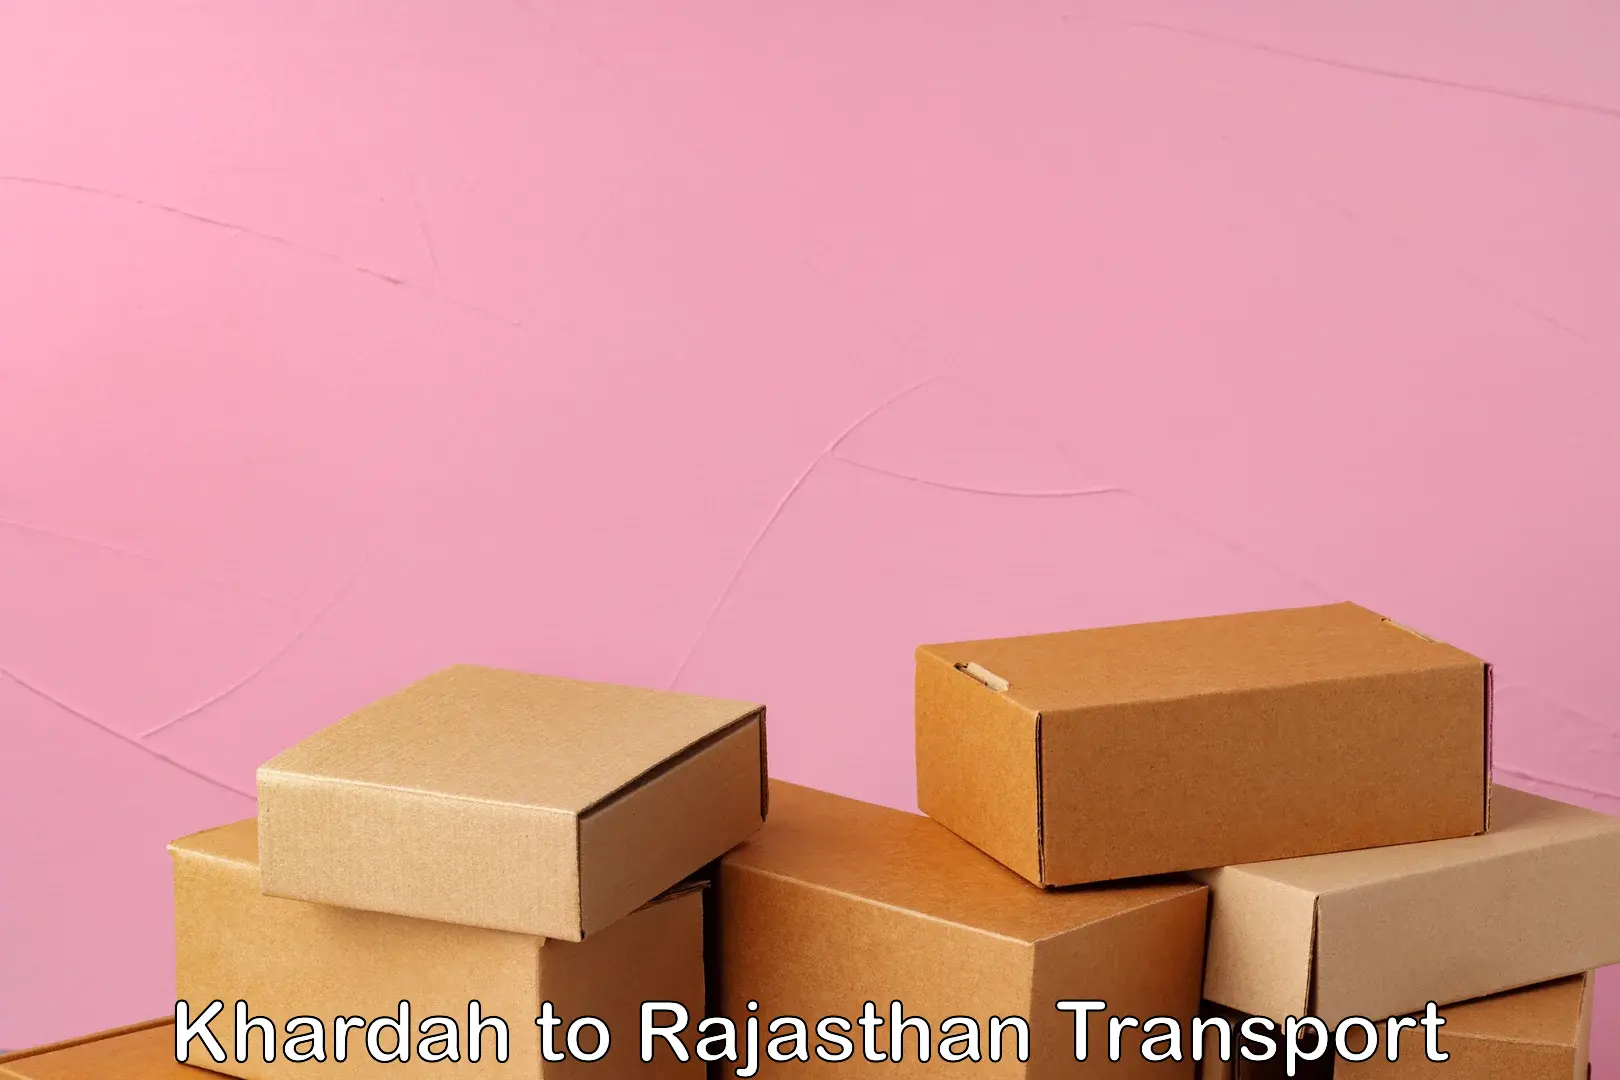 Truck transport companies in India Khardah to Rajasthan